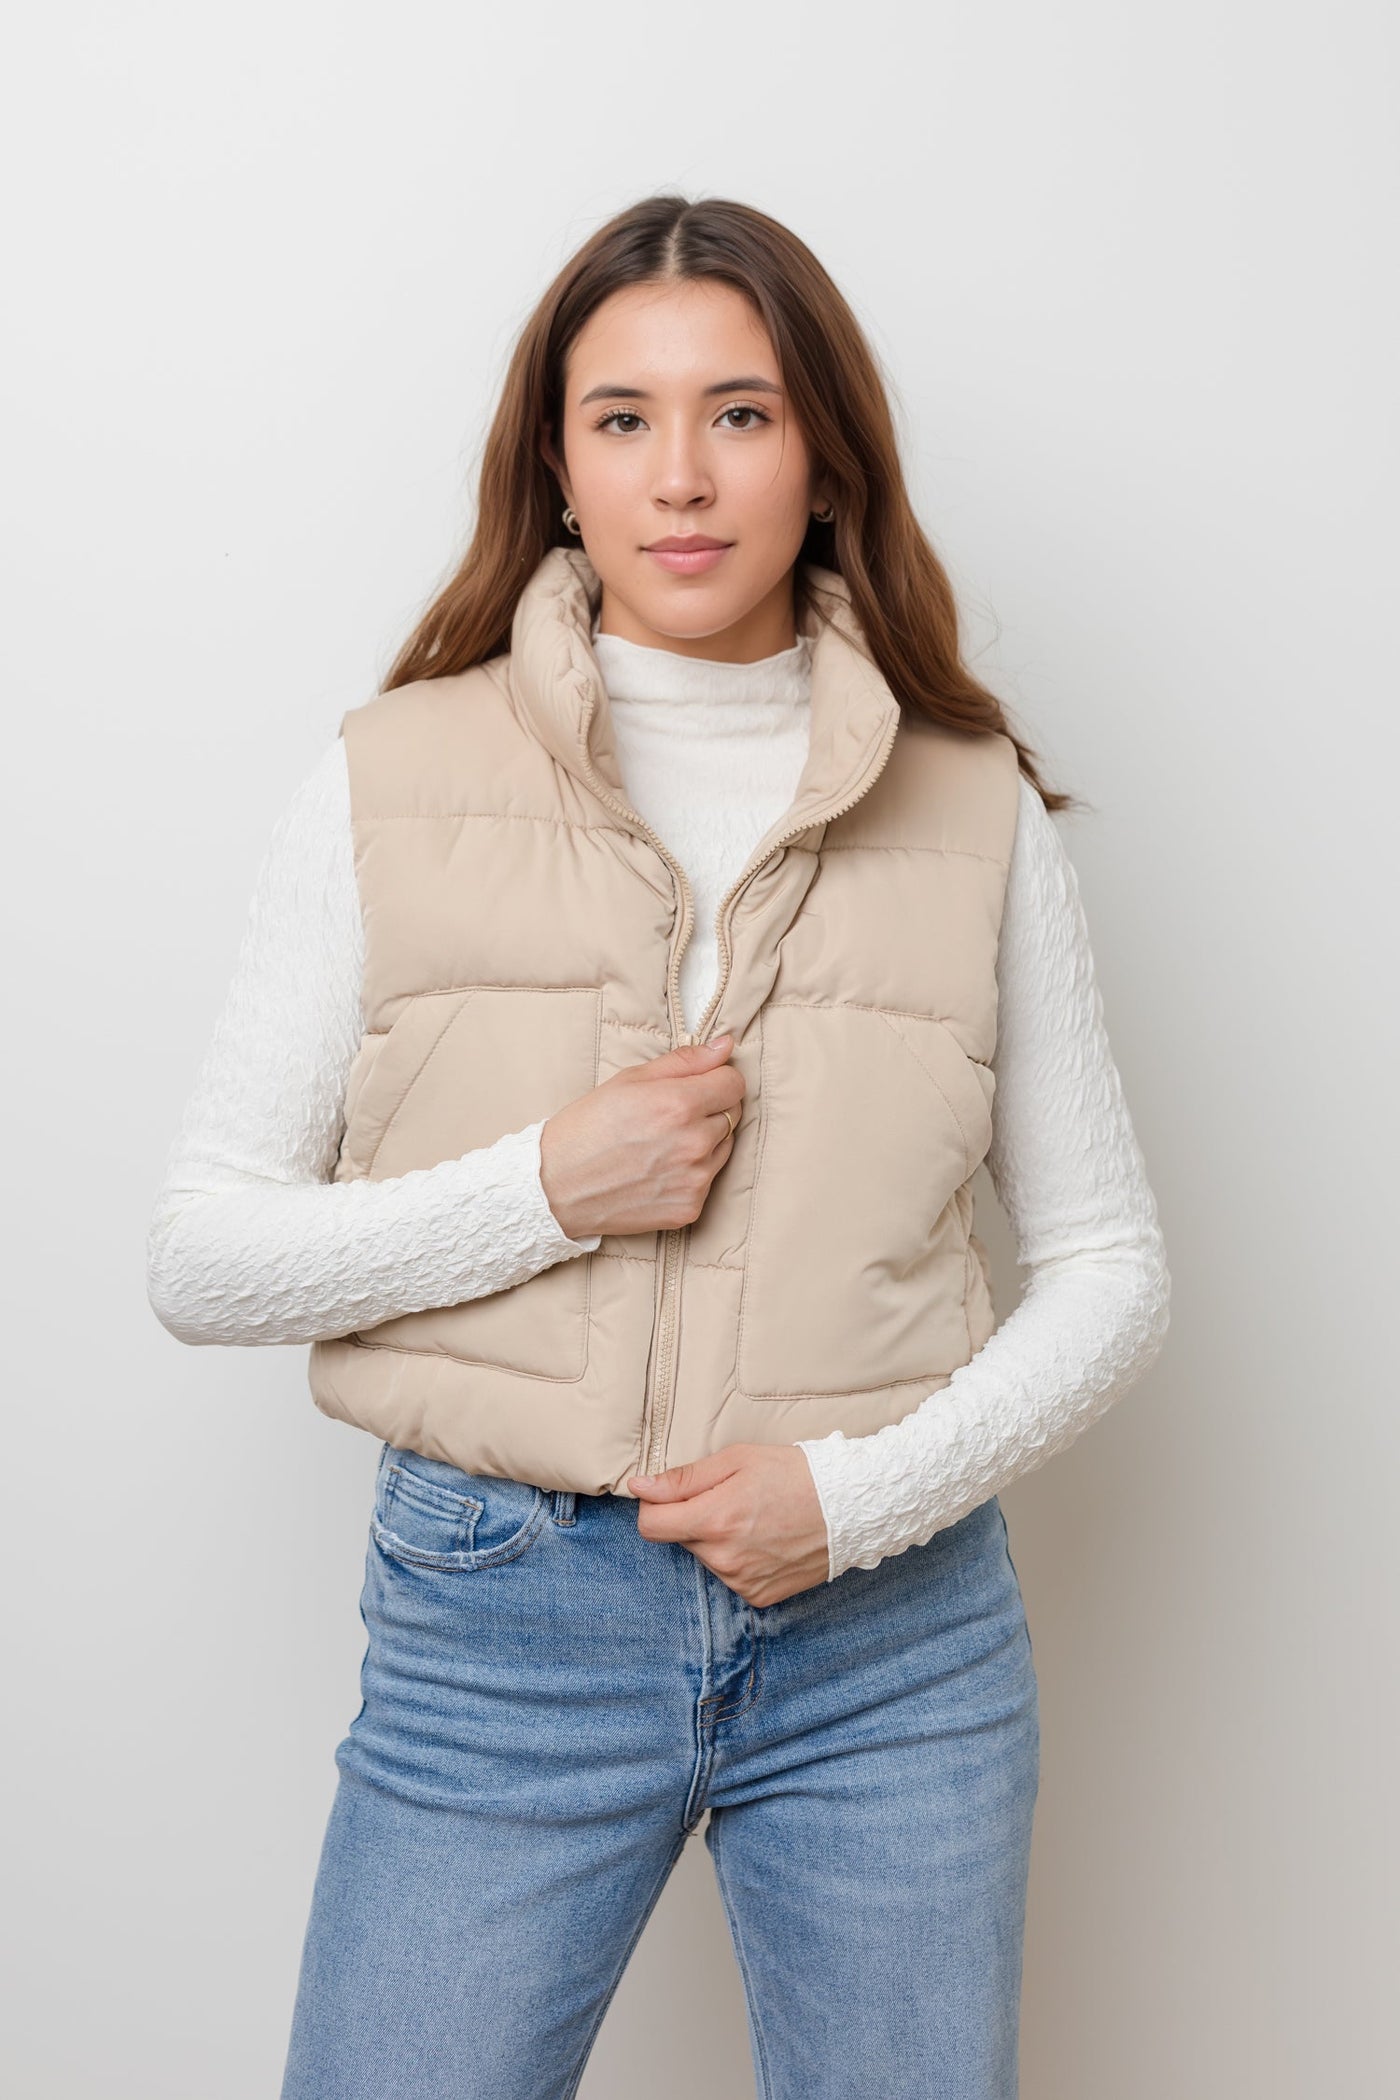 The California Fall Cropped Puffer Vest